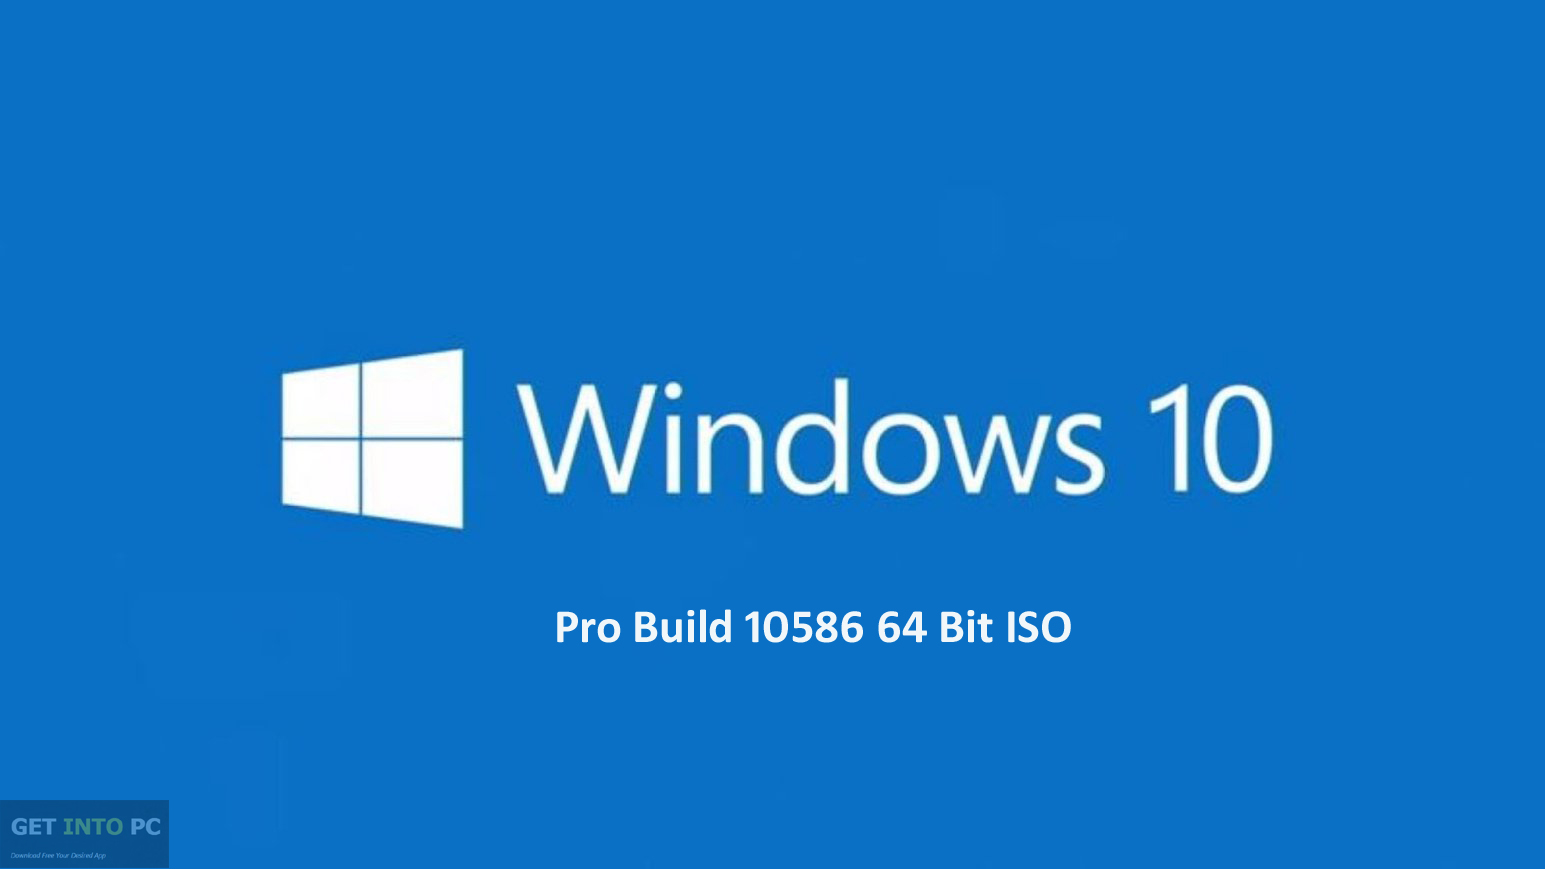 download windows 10 pro iso 64 bit full version with crack